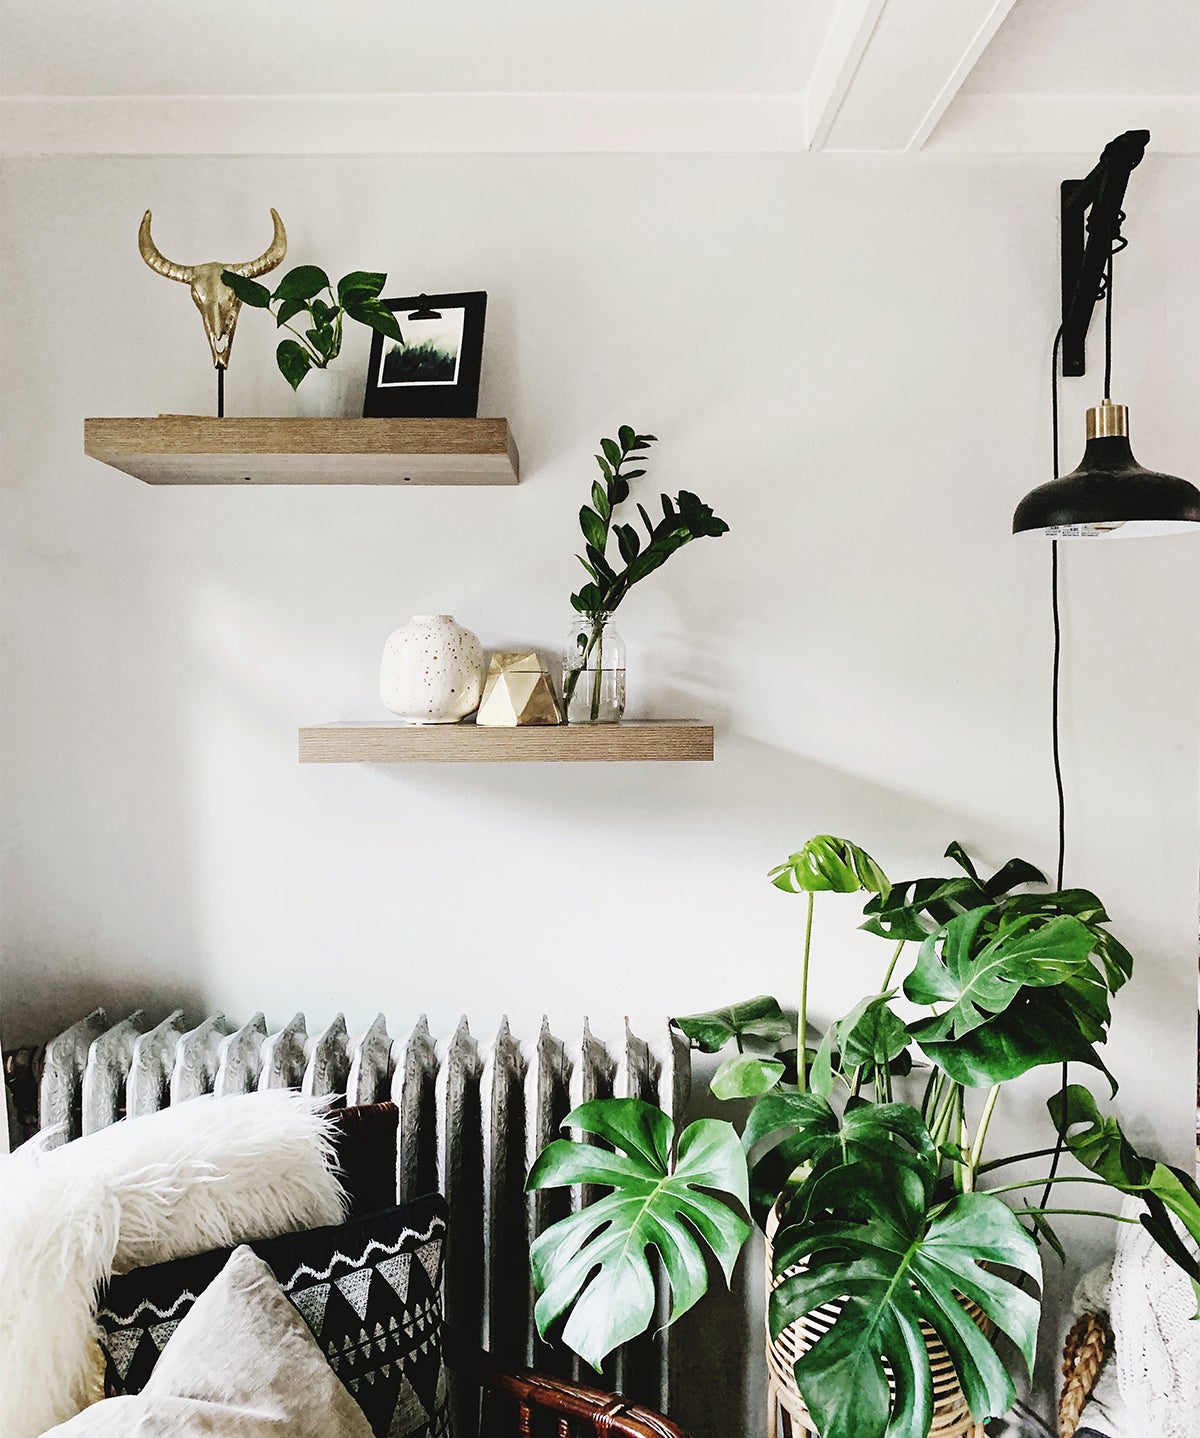 Photo by @kellybananatree of floating shelves next to Monstera plant